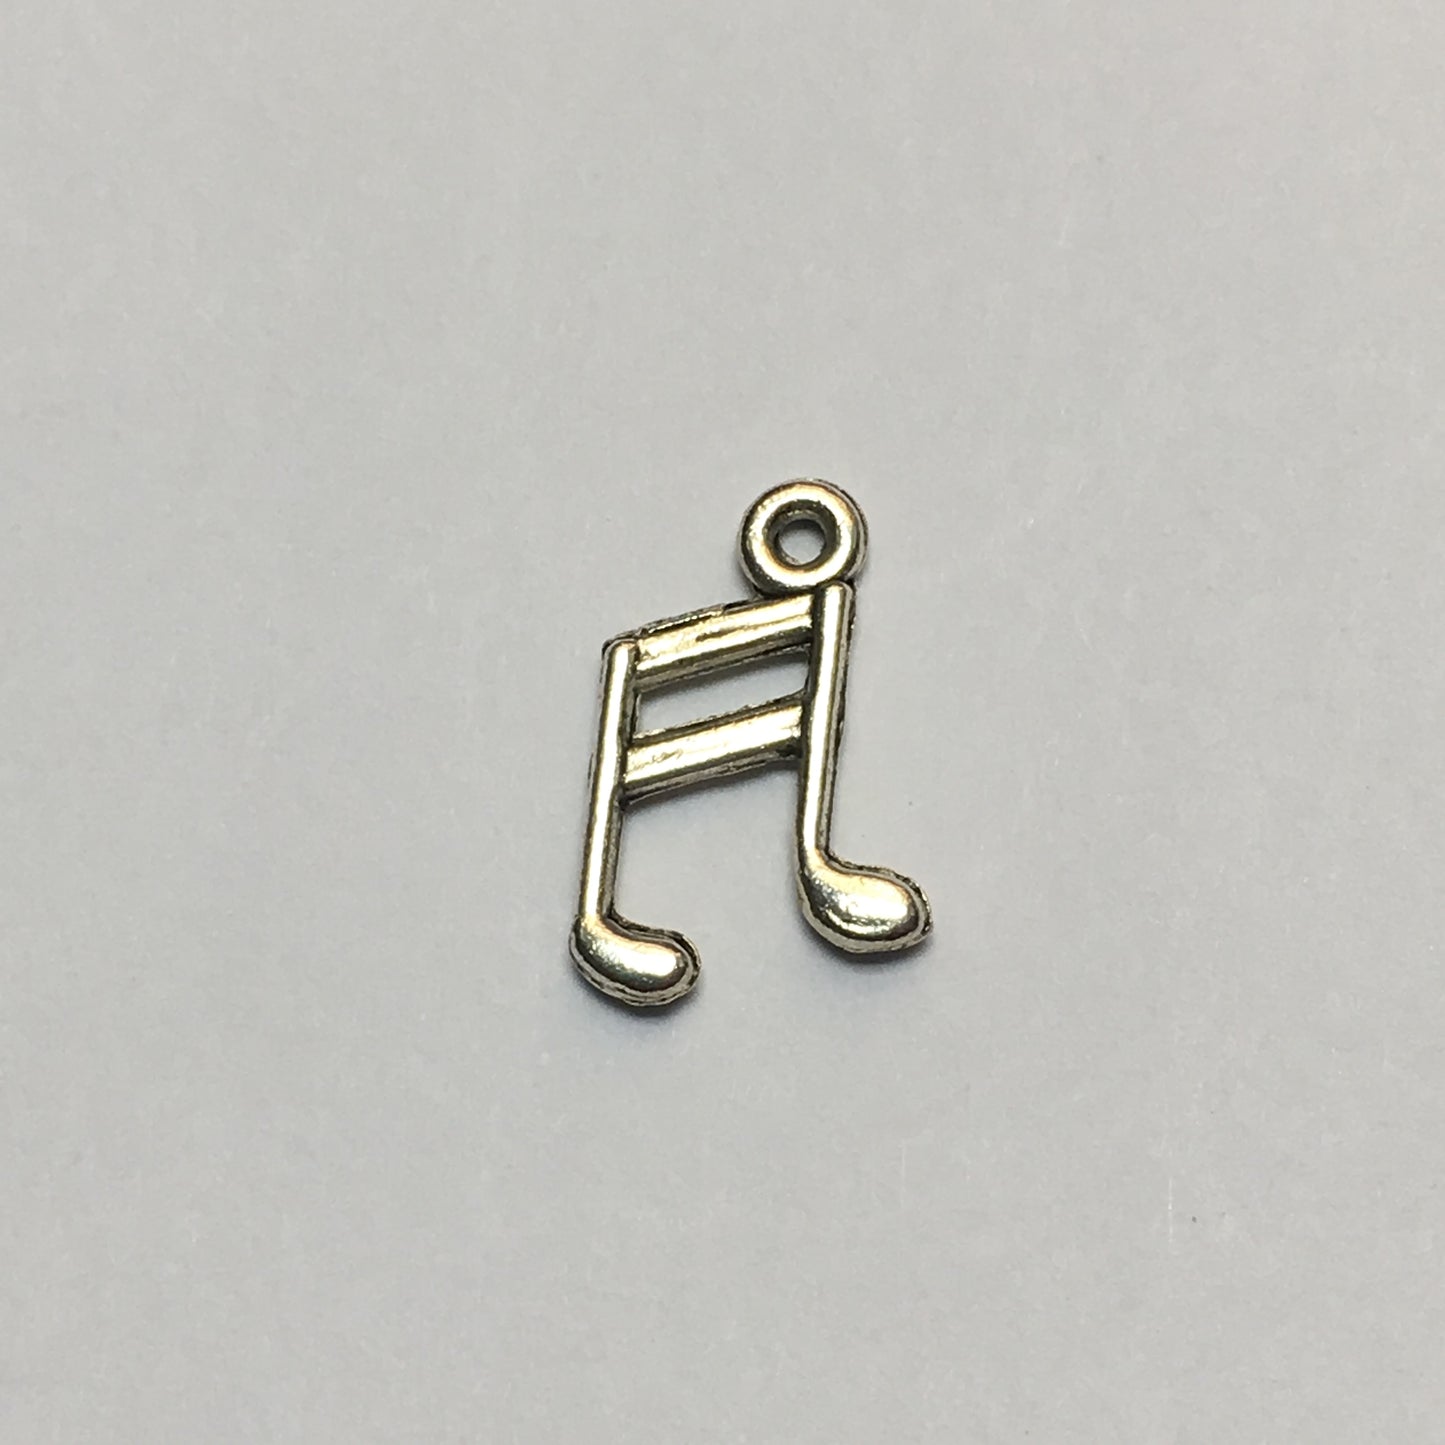 Silver Musical Note Charm, 13 x 9 mm